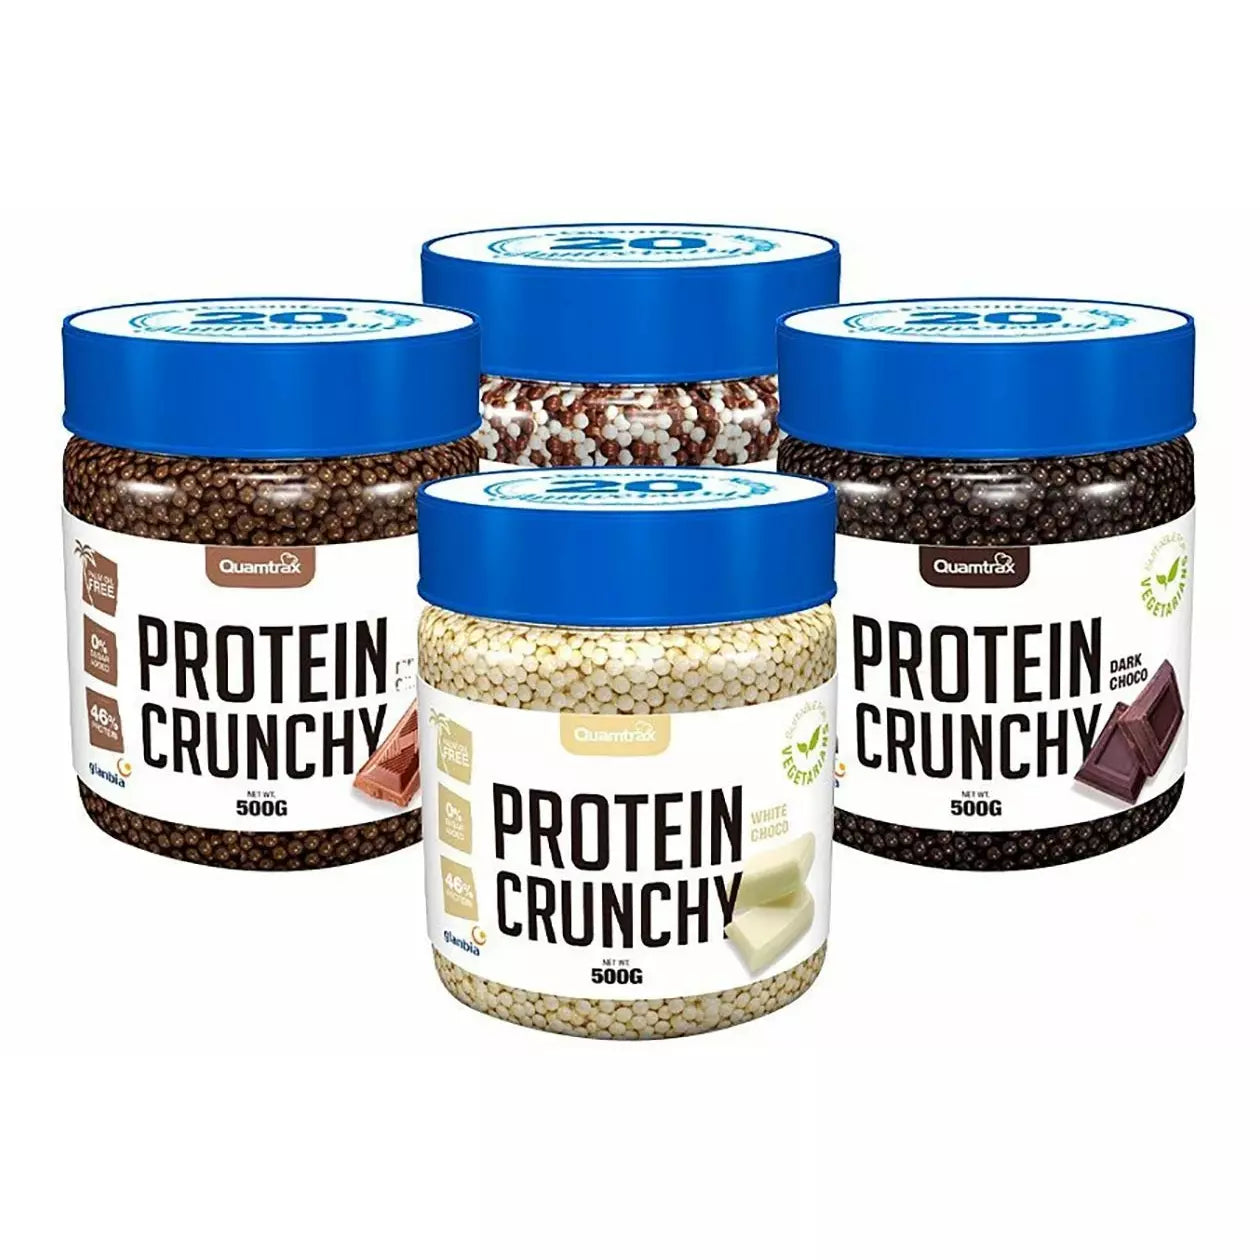 Quamtrax Nutrition Protein Crunchy (500g) Protein Snacks Milk Chocolate BEST BY 23/09/22,White Chocolate,Dark Chocolate,Dark & White Chocolate Quamtrax Nutrition